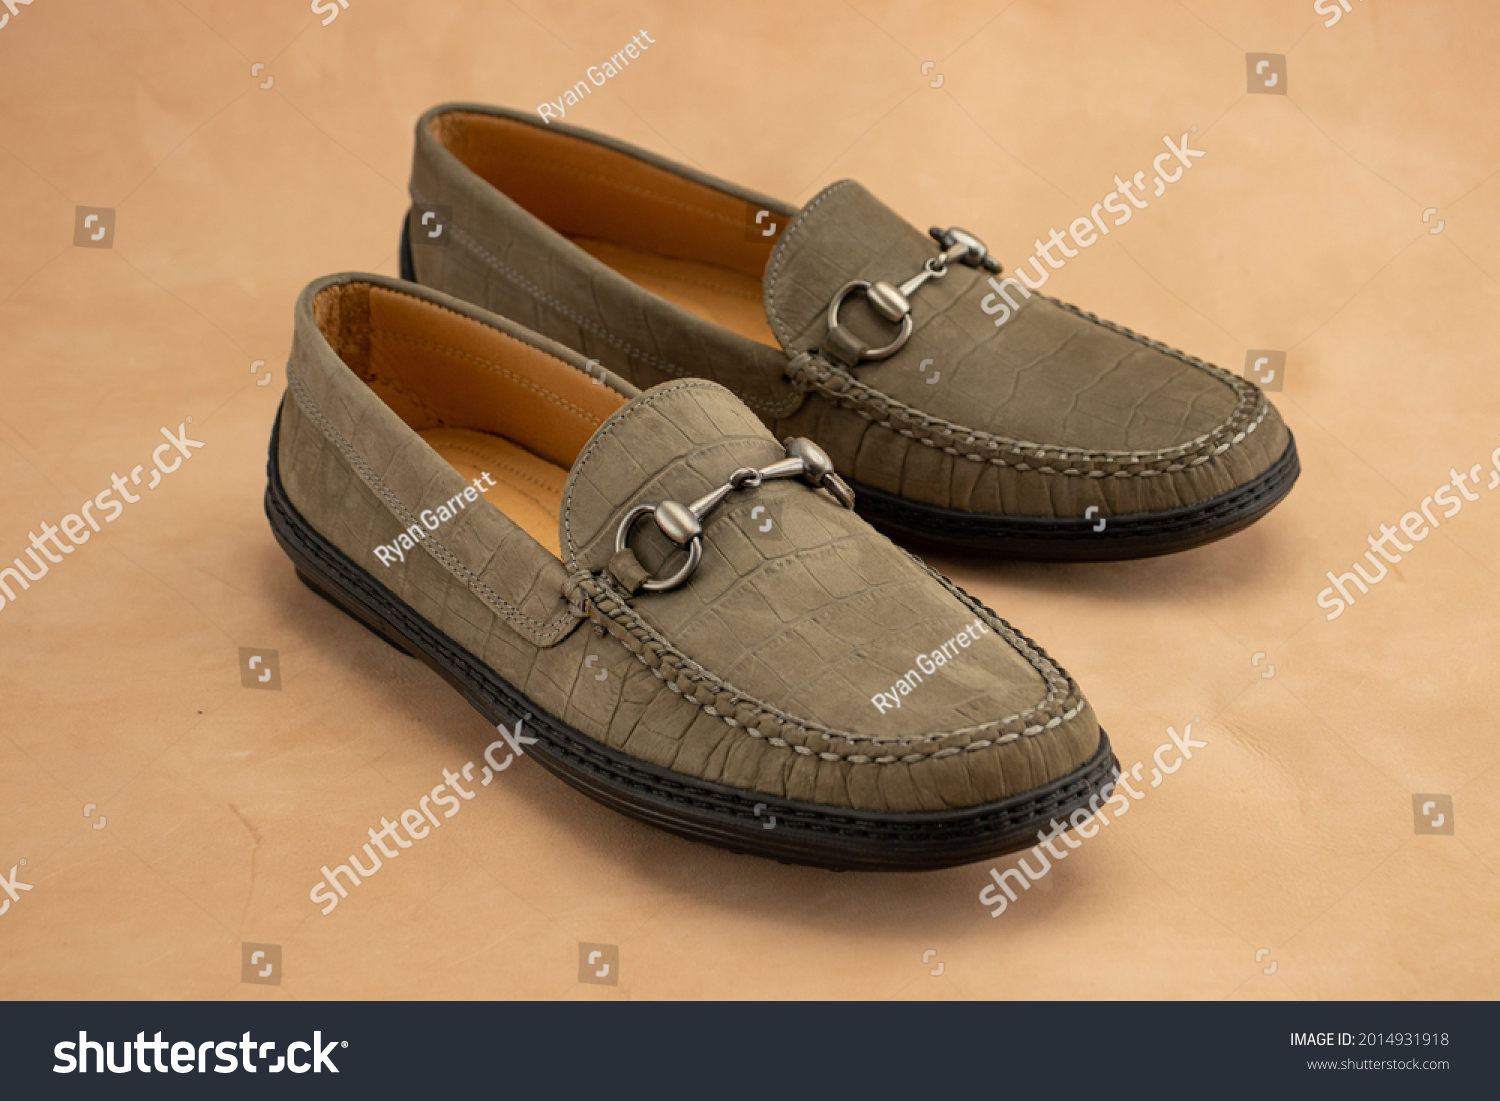 Gray bit loafers made from alligator texture leather for preppy formal mens shoes. #2014931918